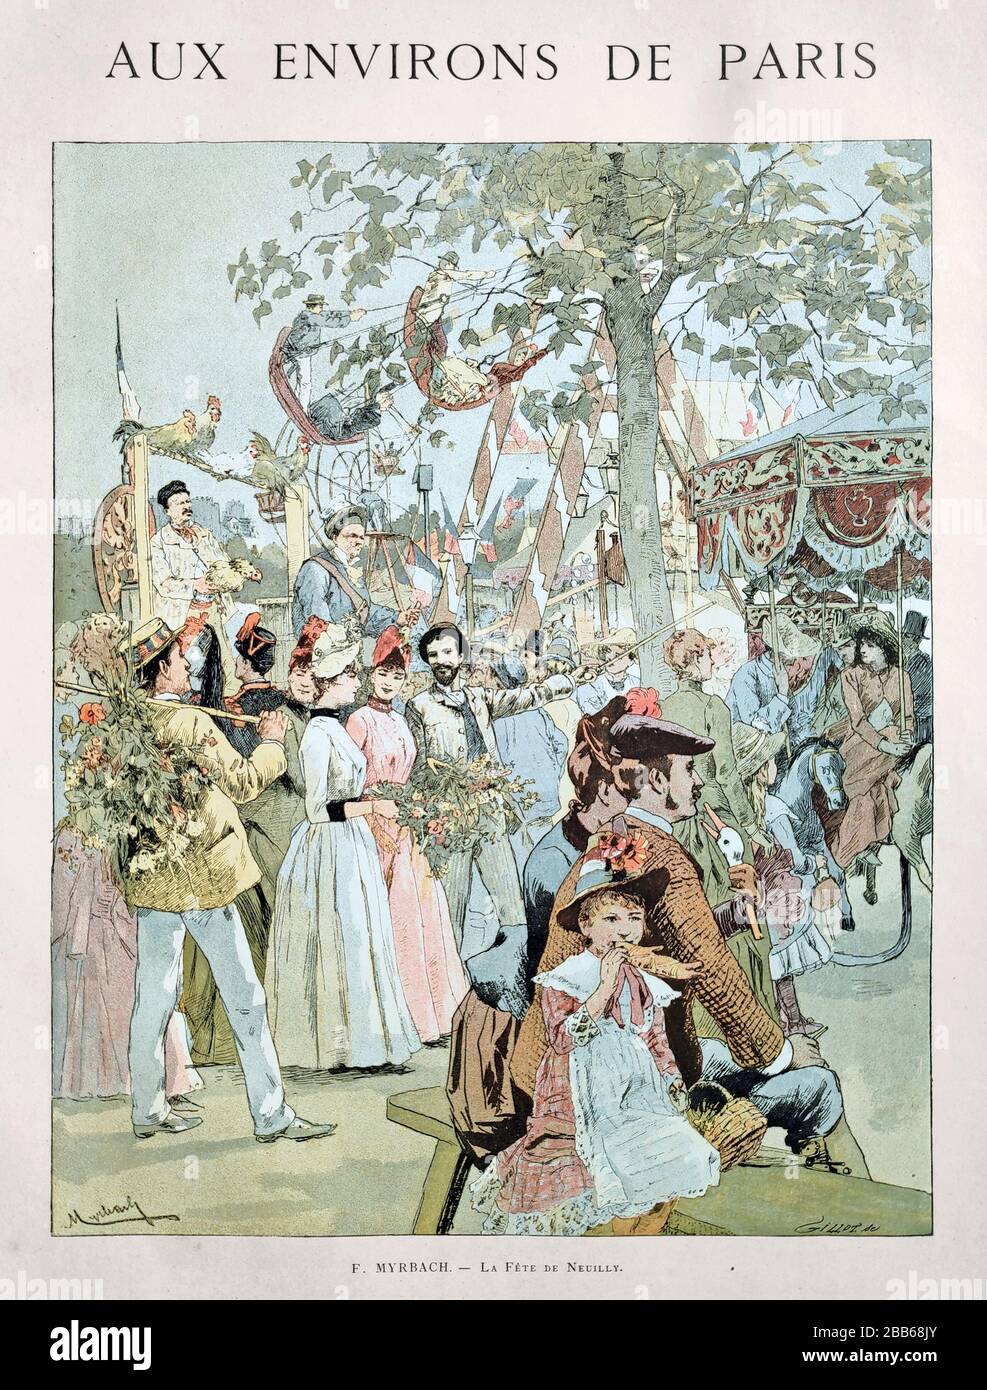 Illustration of a Parisians at a funfair entitled 'La fête de Neuilly' by Felician Myrbach and engraved by Gillot published in 1885. Stock Photo